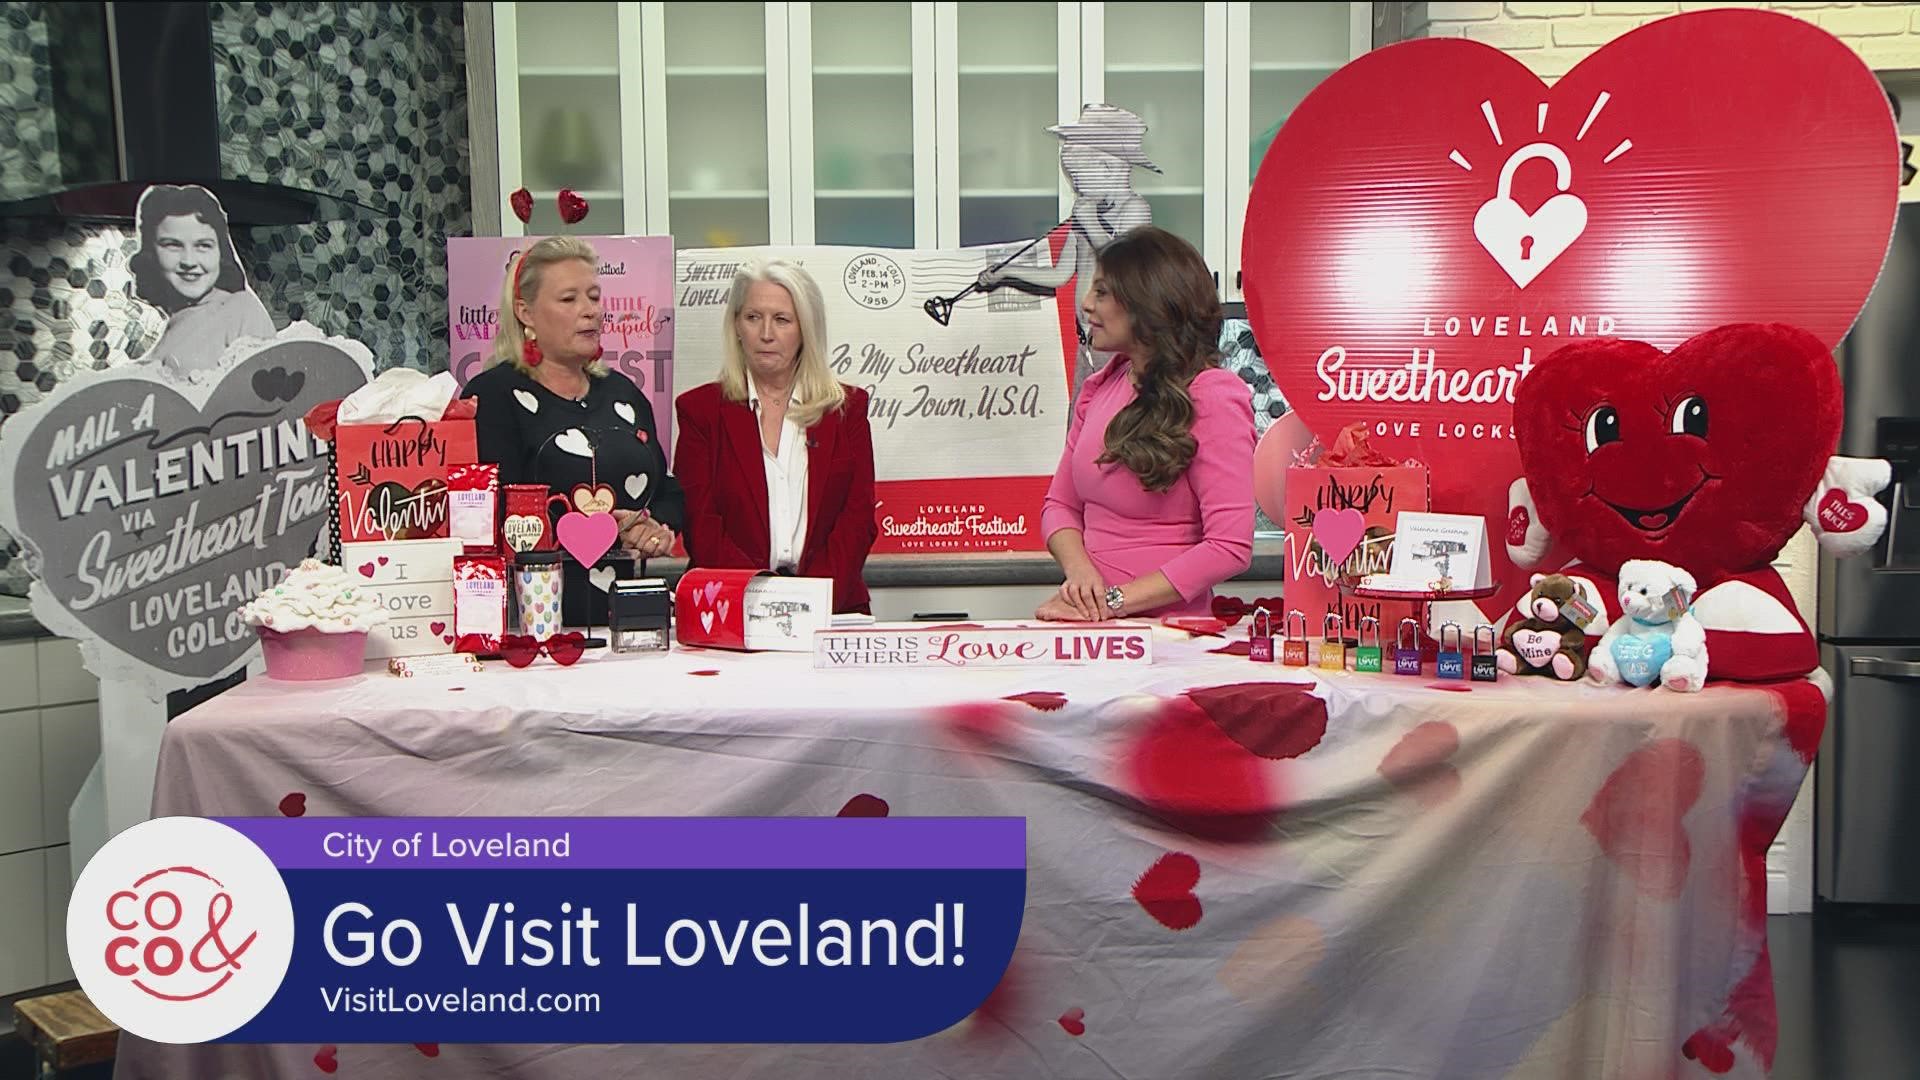 Feel the love and head up to Loveland this Valentine's Day. Find a full list of events at VisitLoveland.com.